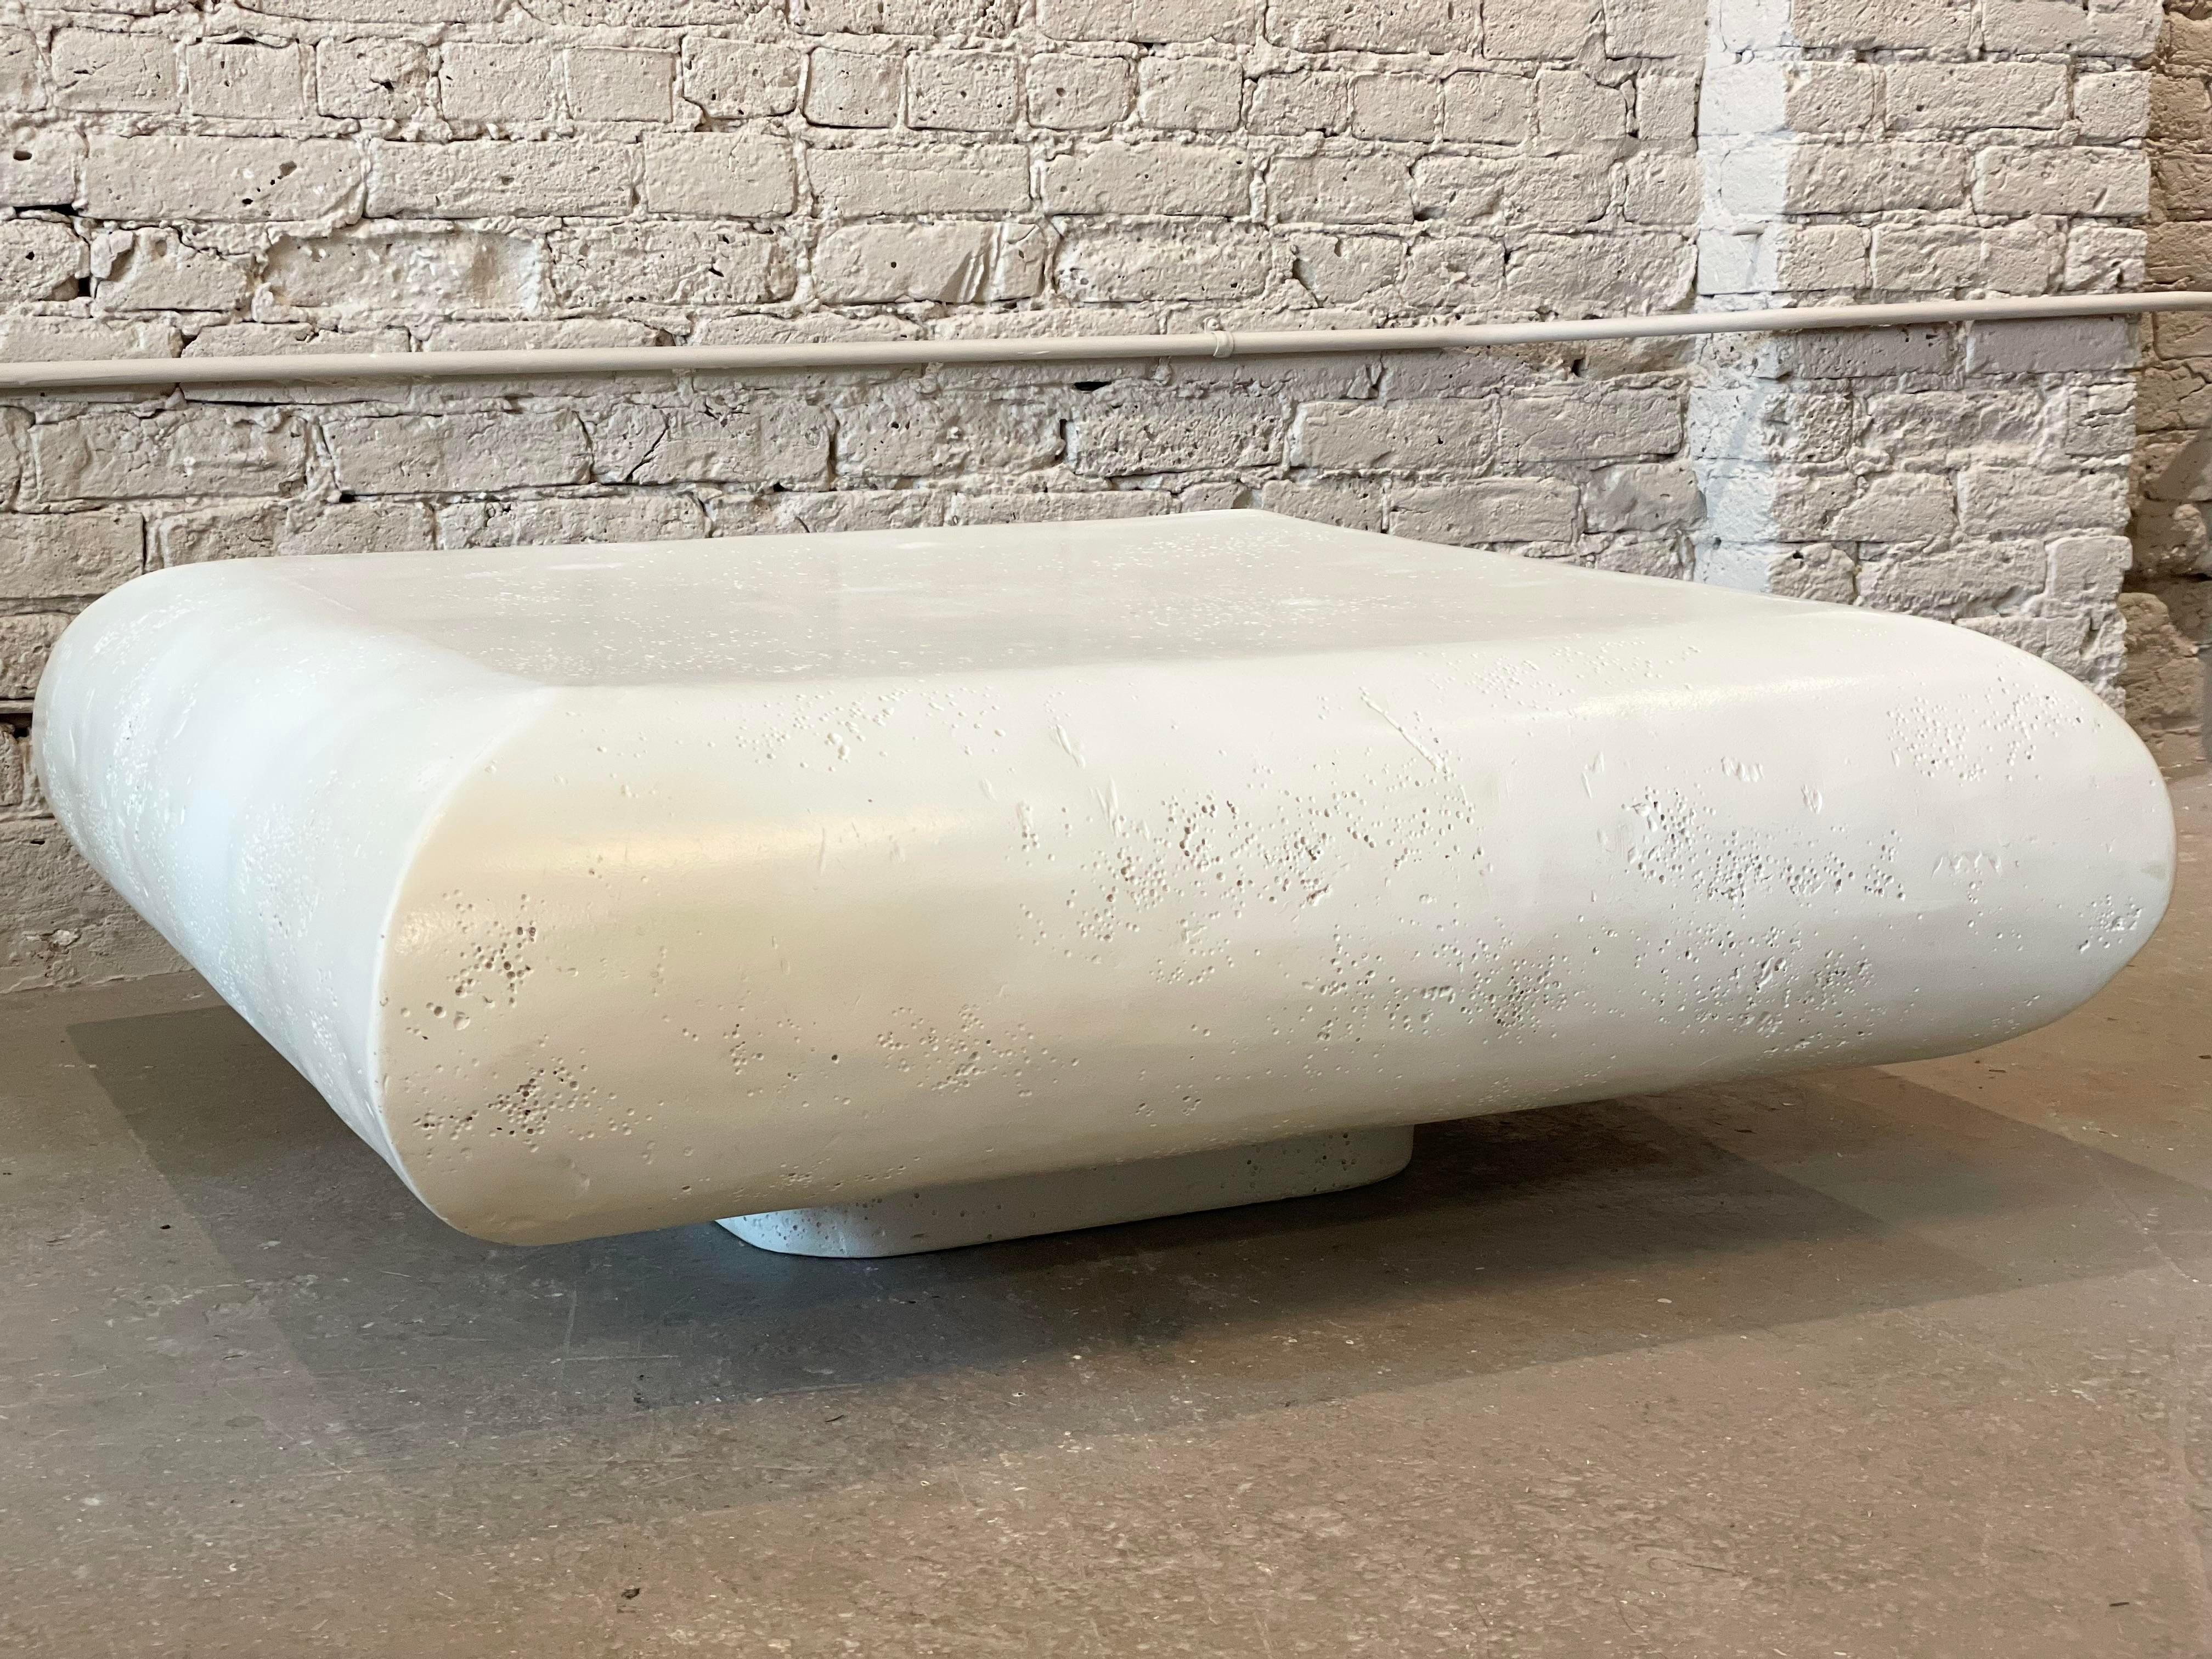 Super cool coffee table! Very modern minimal with a space age vibe. Heavy but not too heavy - 2 people can easily move it. It’s also very kid friendly due to the rounded organic edges. Love this!
The color is ivory not pure white.